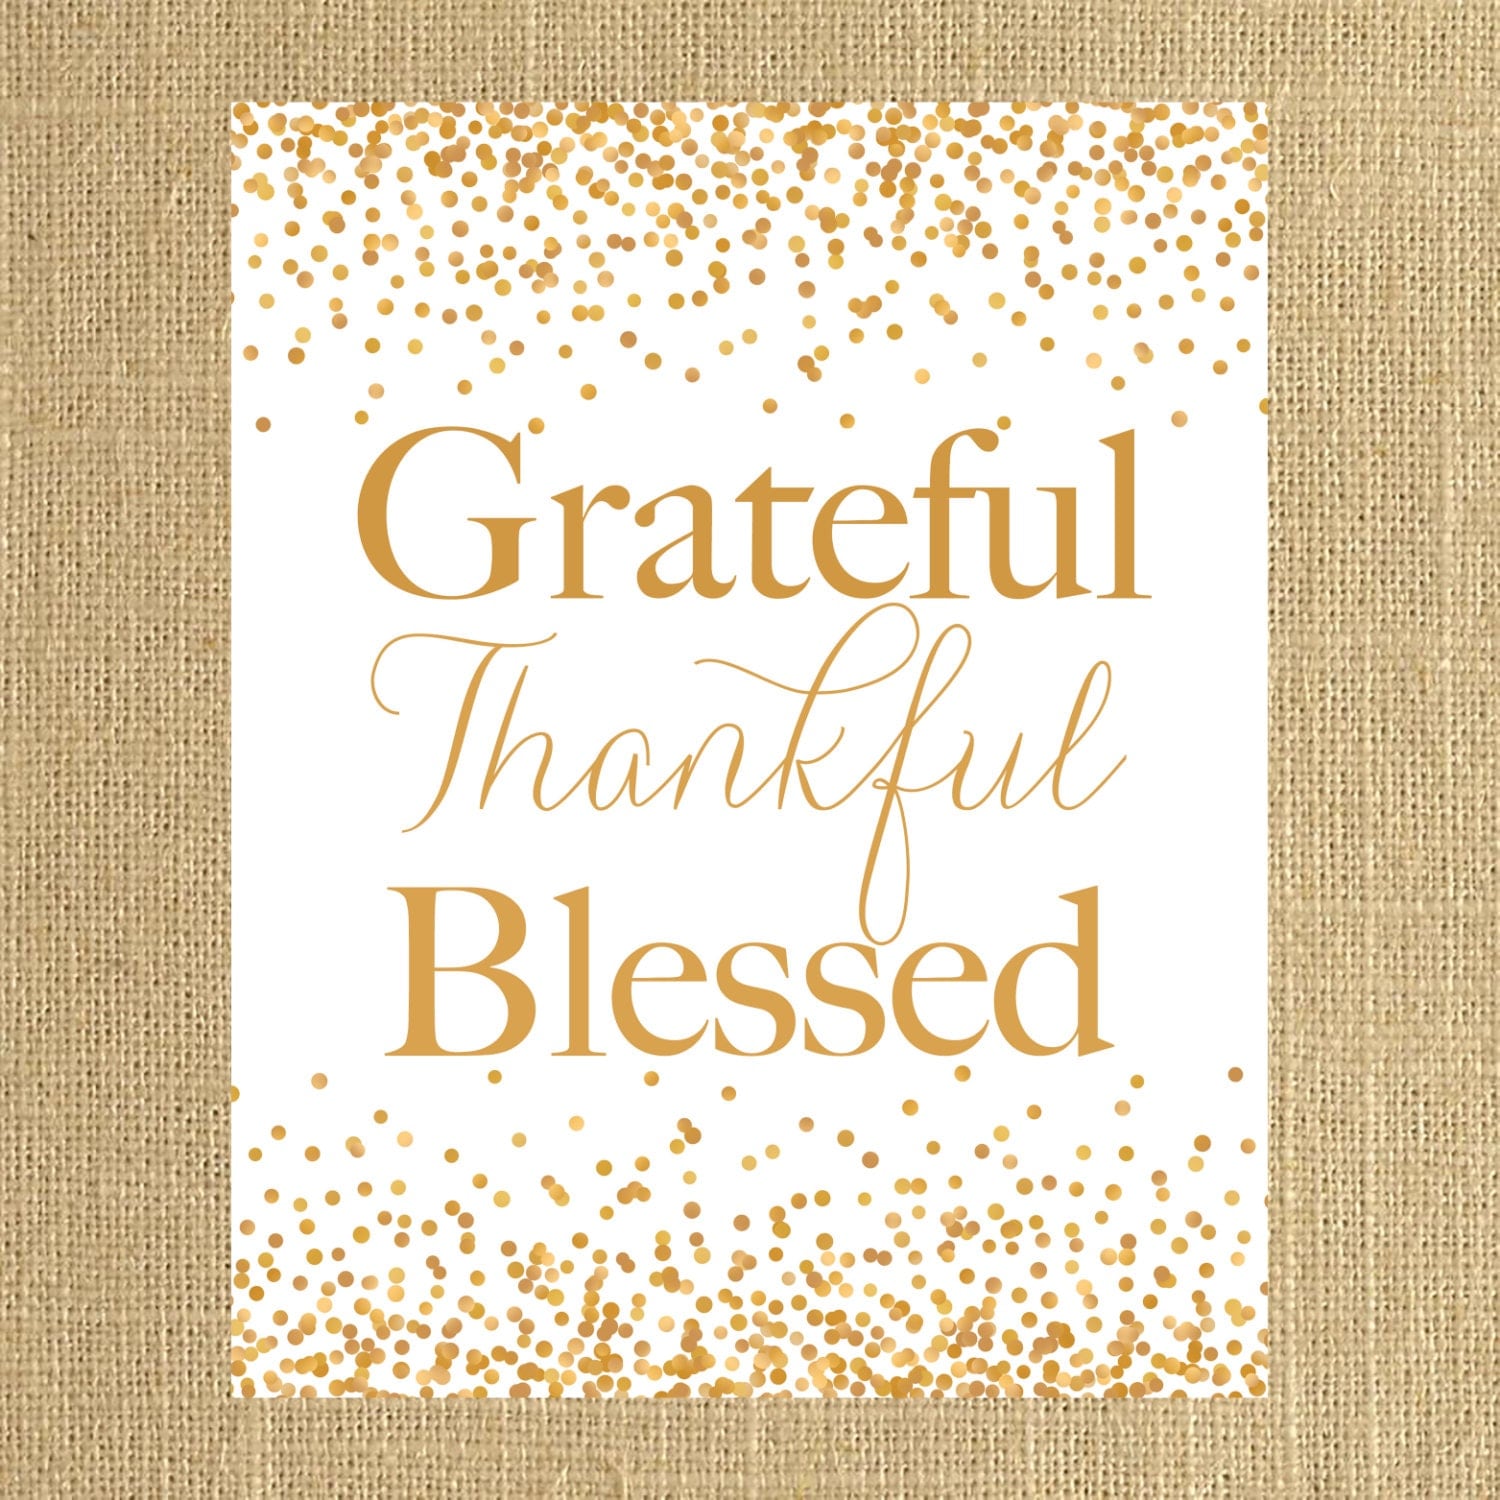 grateful-thankful-blessed-printable-wall-art-chicfetti